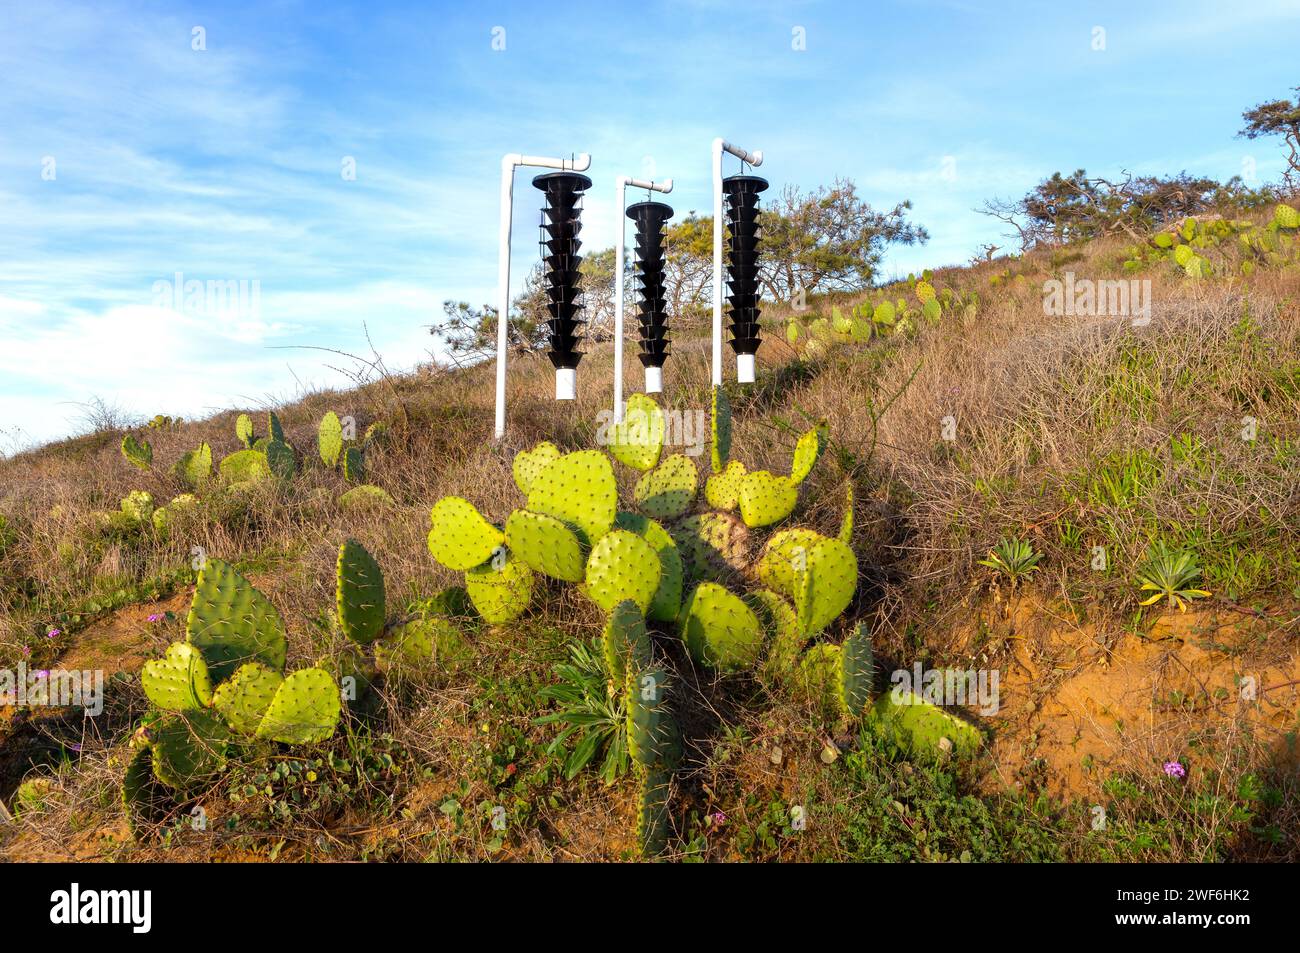 Bark Beetle Insect Cone Traps in Famous Torrey Pines State Park with Desert Cactus Plants in Foreground. San Diego California Southern USA Stock Photo